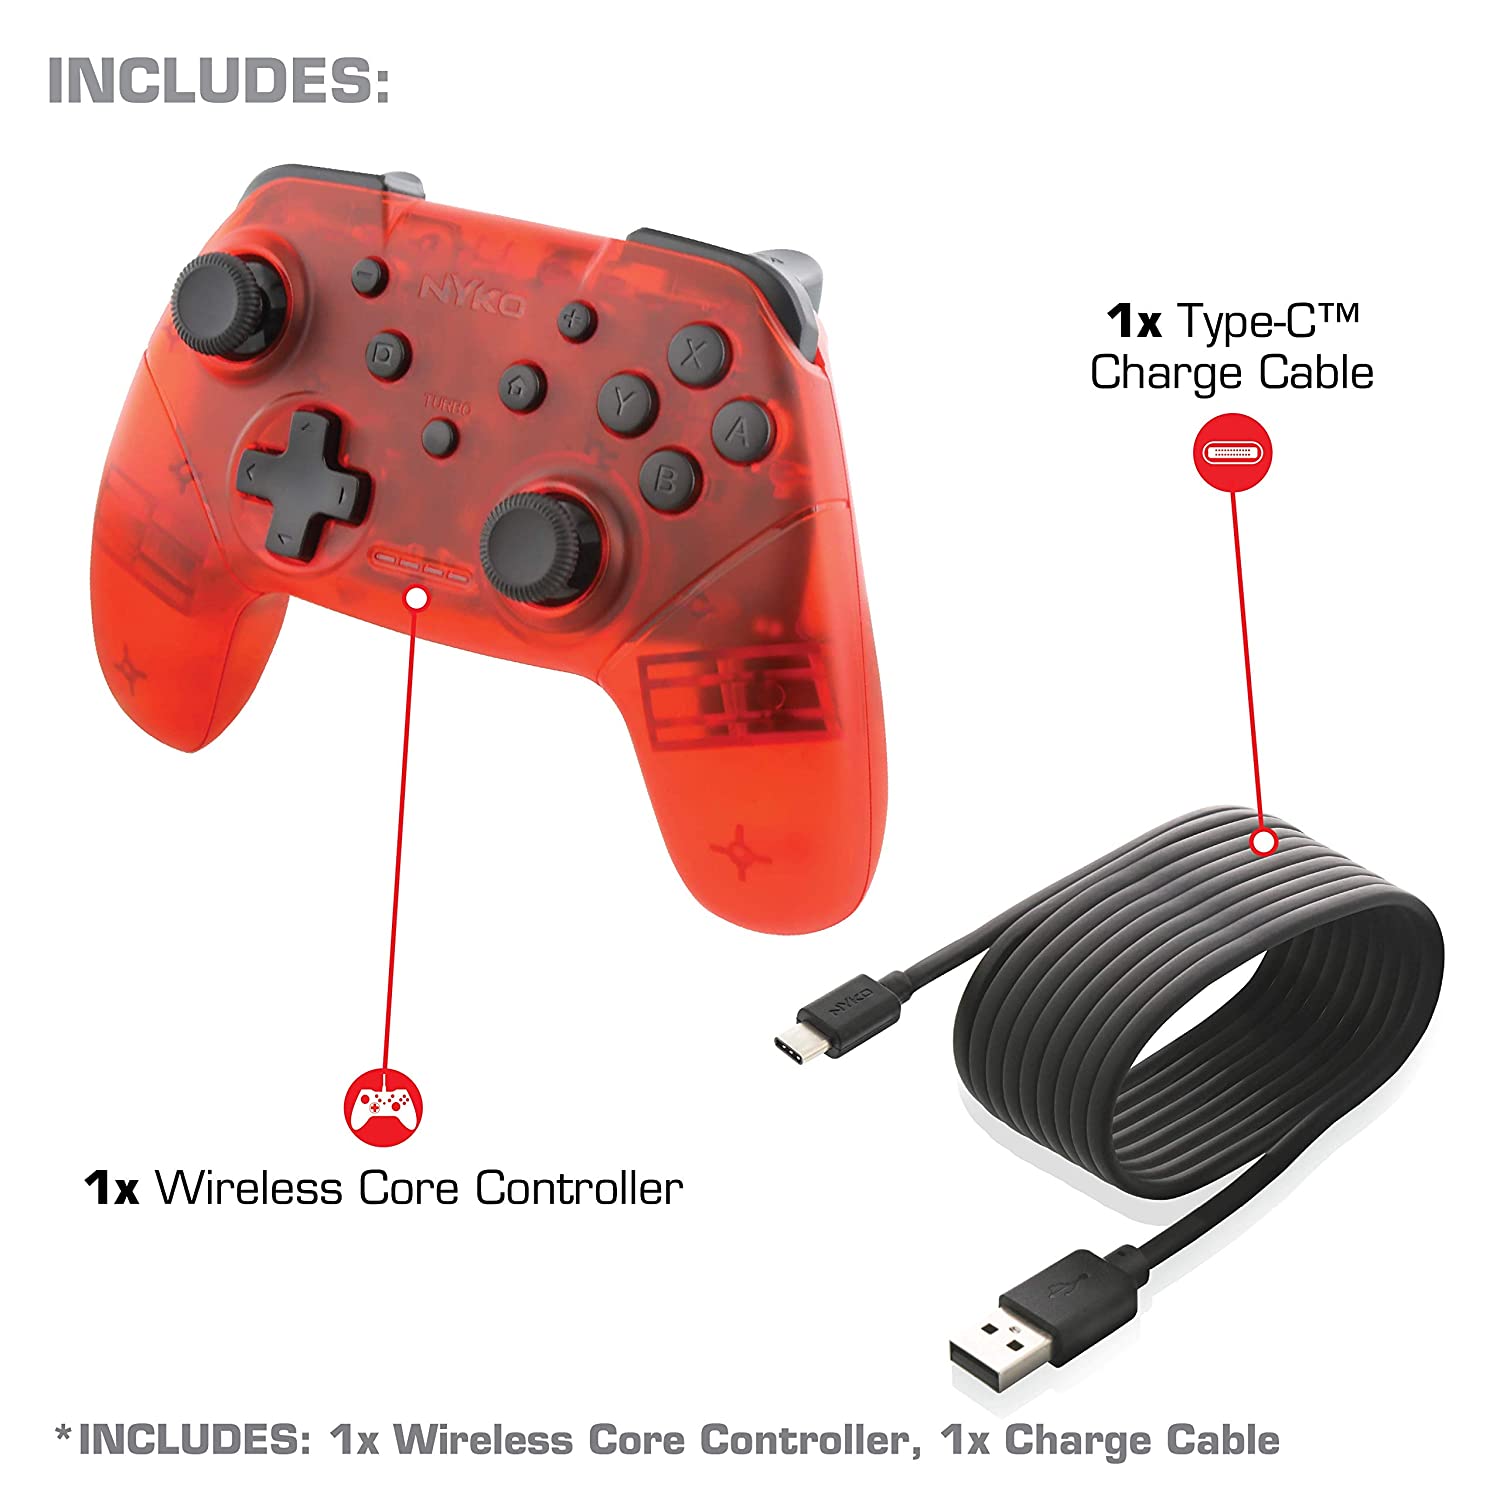 Nyko NSW Wireless Core Controller Translucent Red (87261)